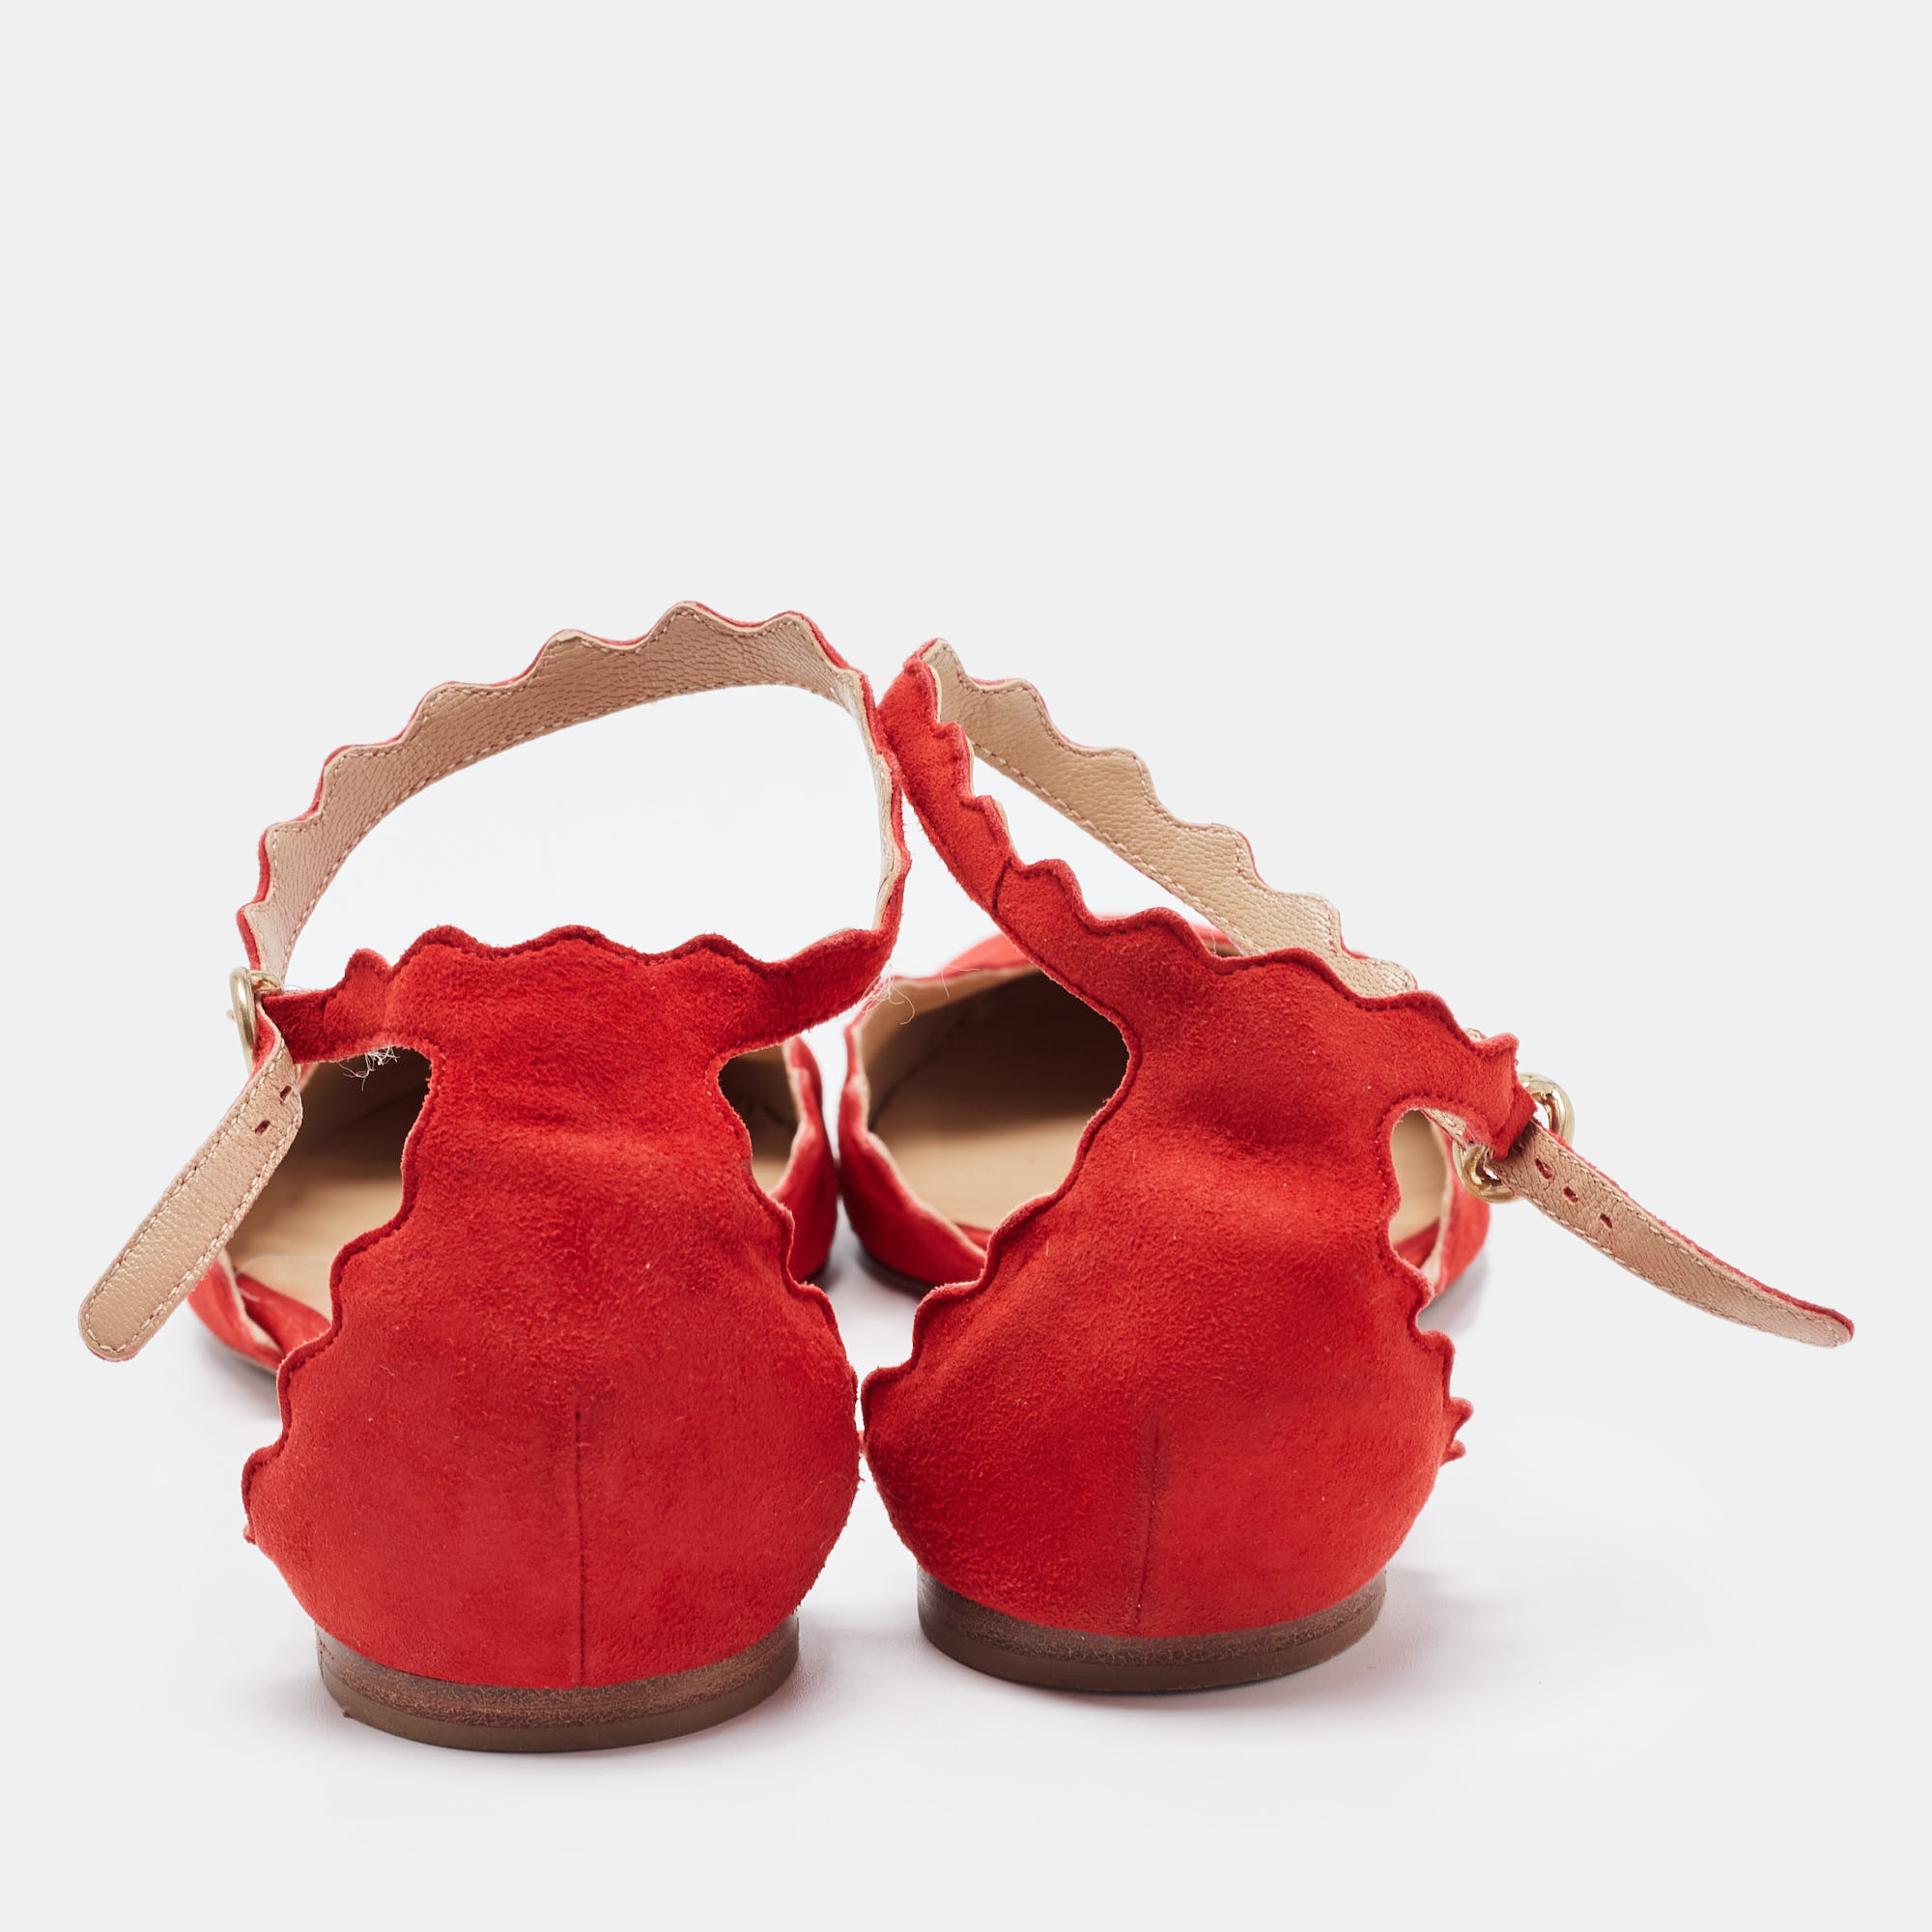 Chloe Red Scalloped Suede Lauren Ankle Strap Flats Size 38.5